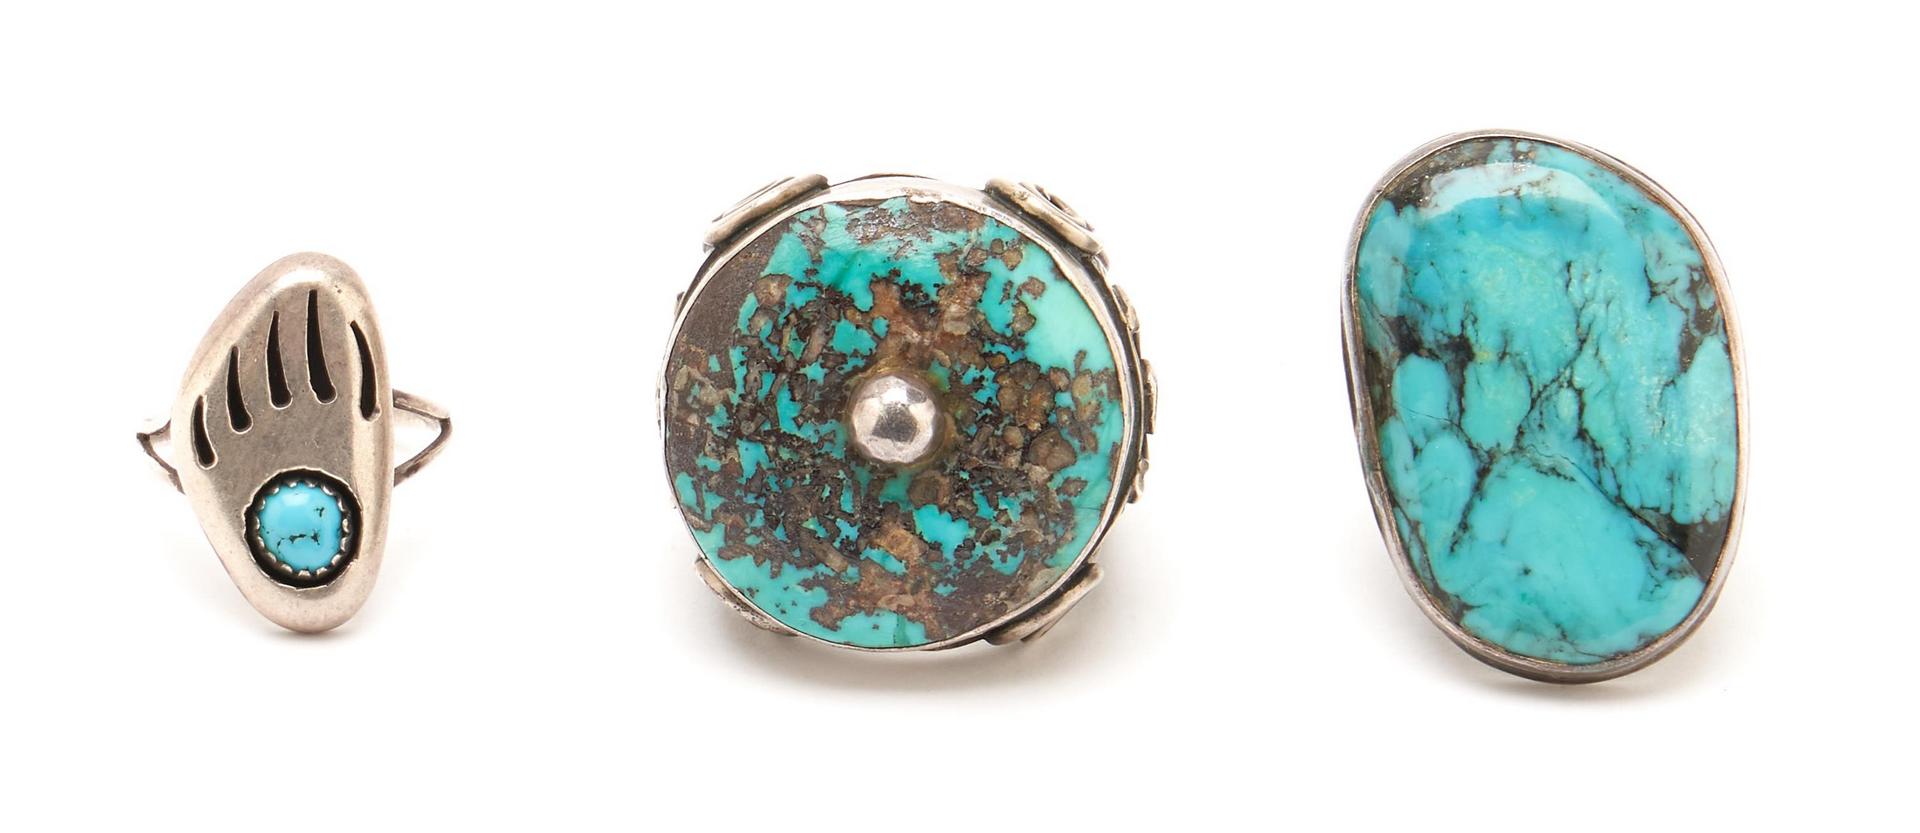 Lot 1091: 5 Pcs. Native American Turquoise & Silver Jewelry